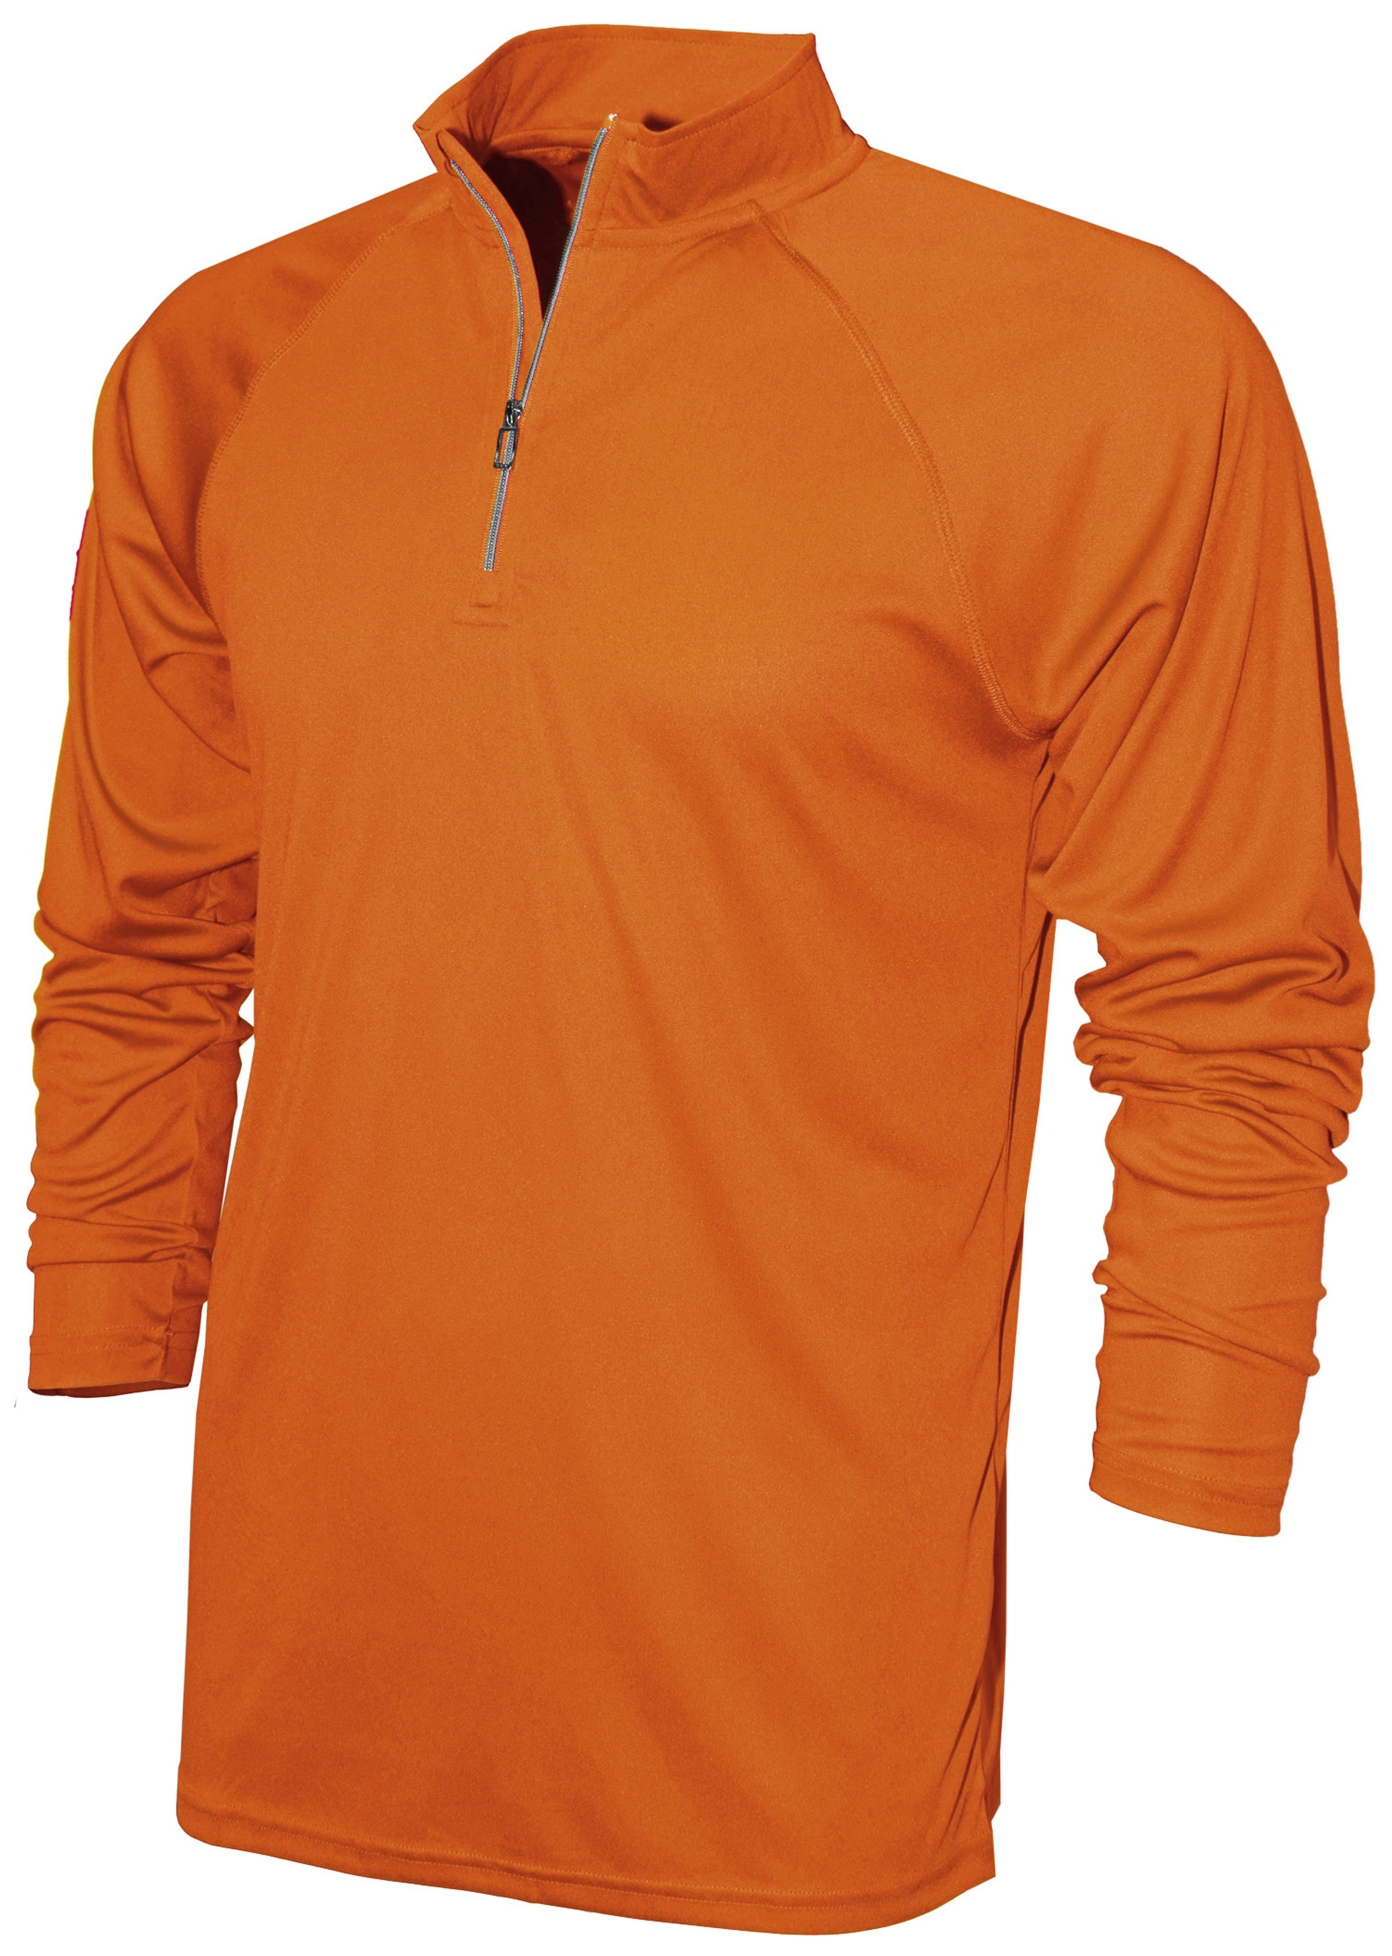 E91681 Baw Adult/Youth Xtreme-Tek 4 Runners Pullover